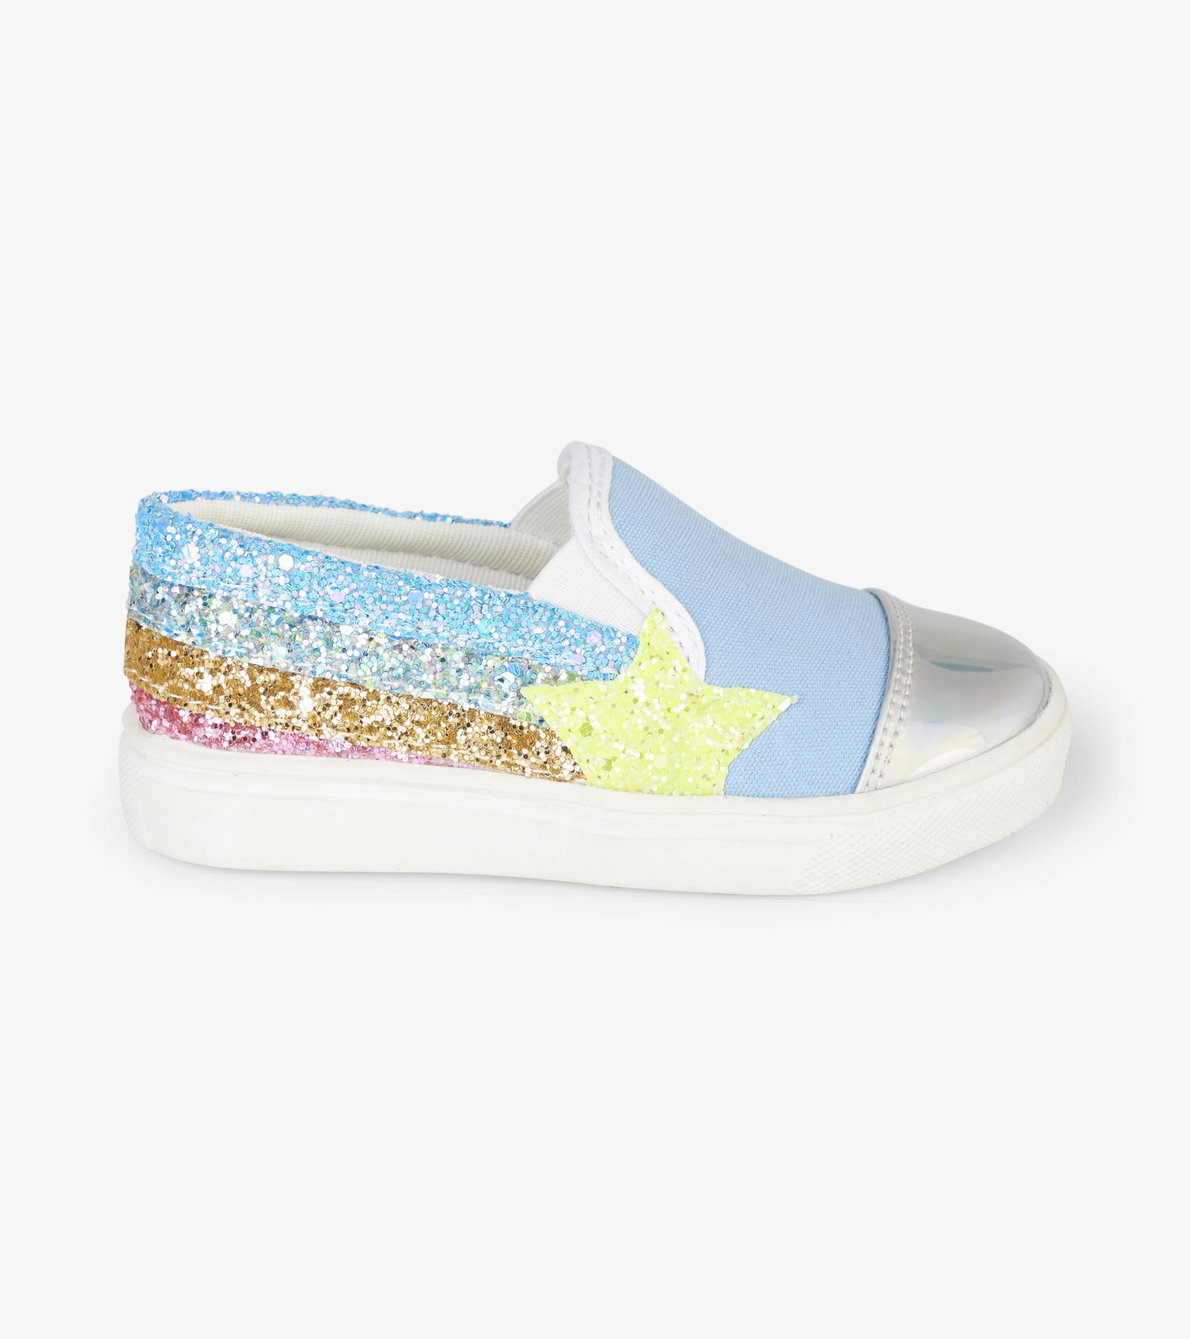 View larger image of Shooting Star Slip On Sneaker